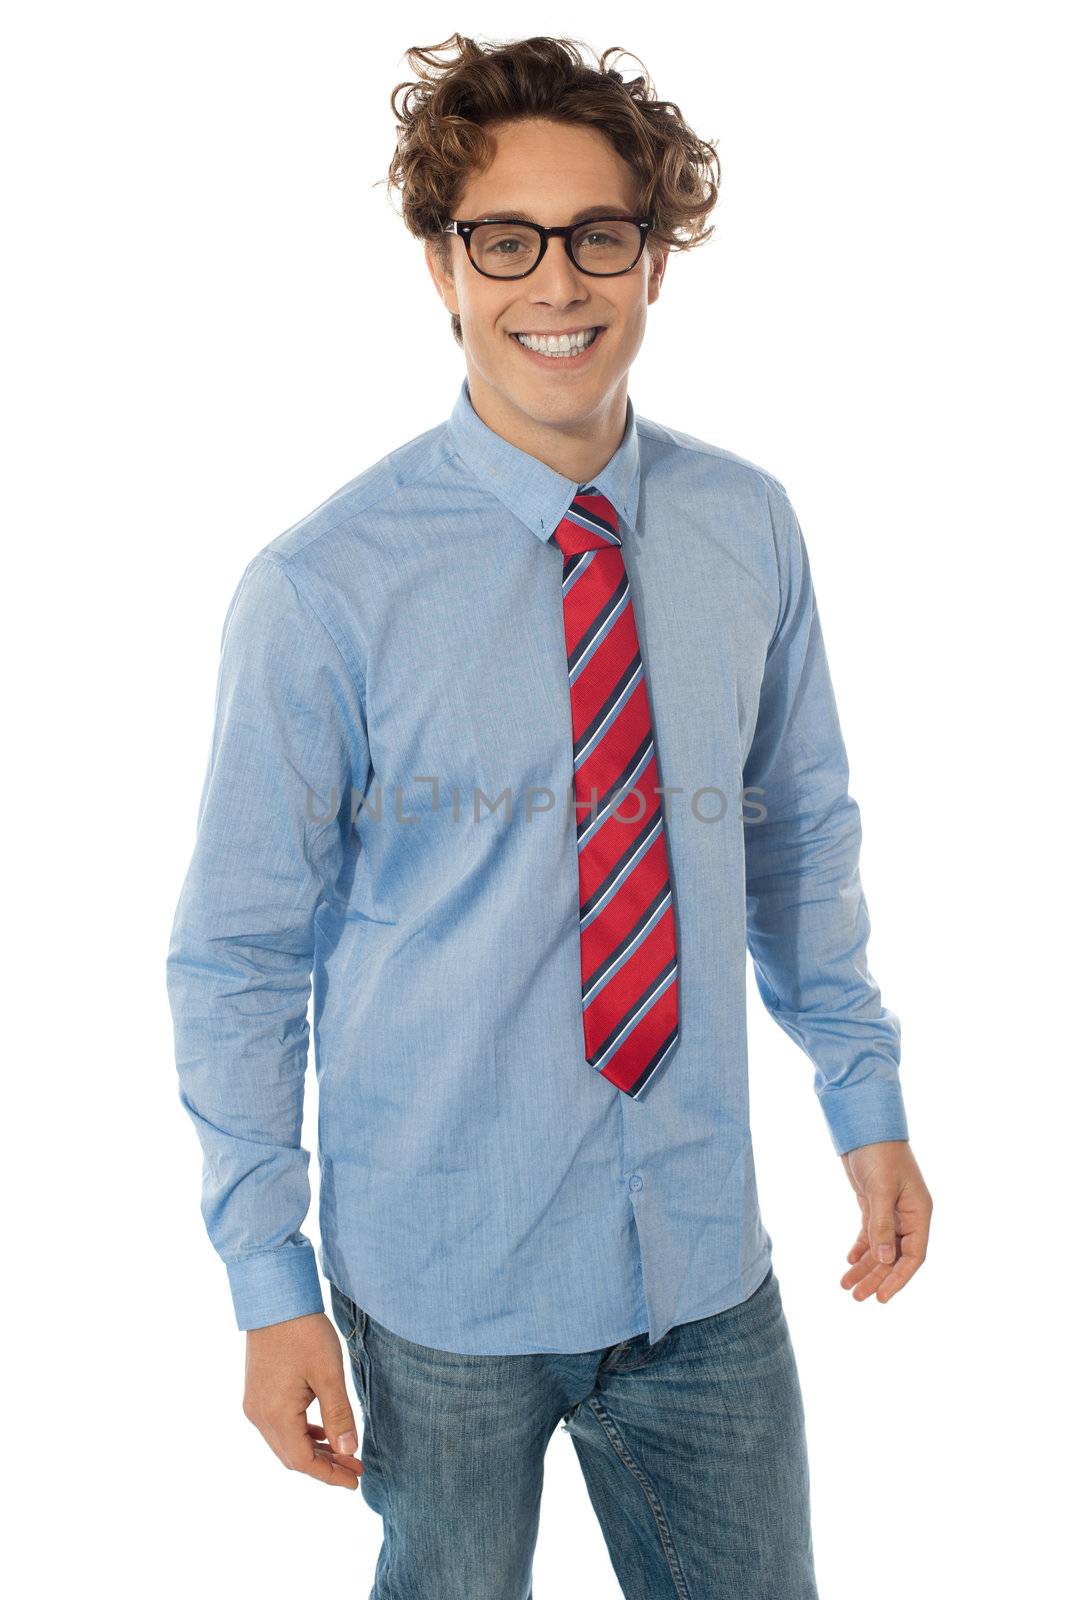 A young teenager in blue shirt, jeans and tie by stockyimages